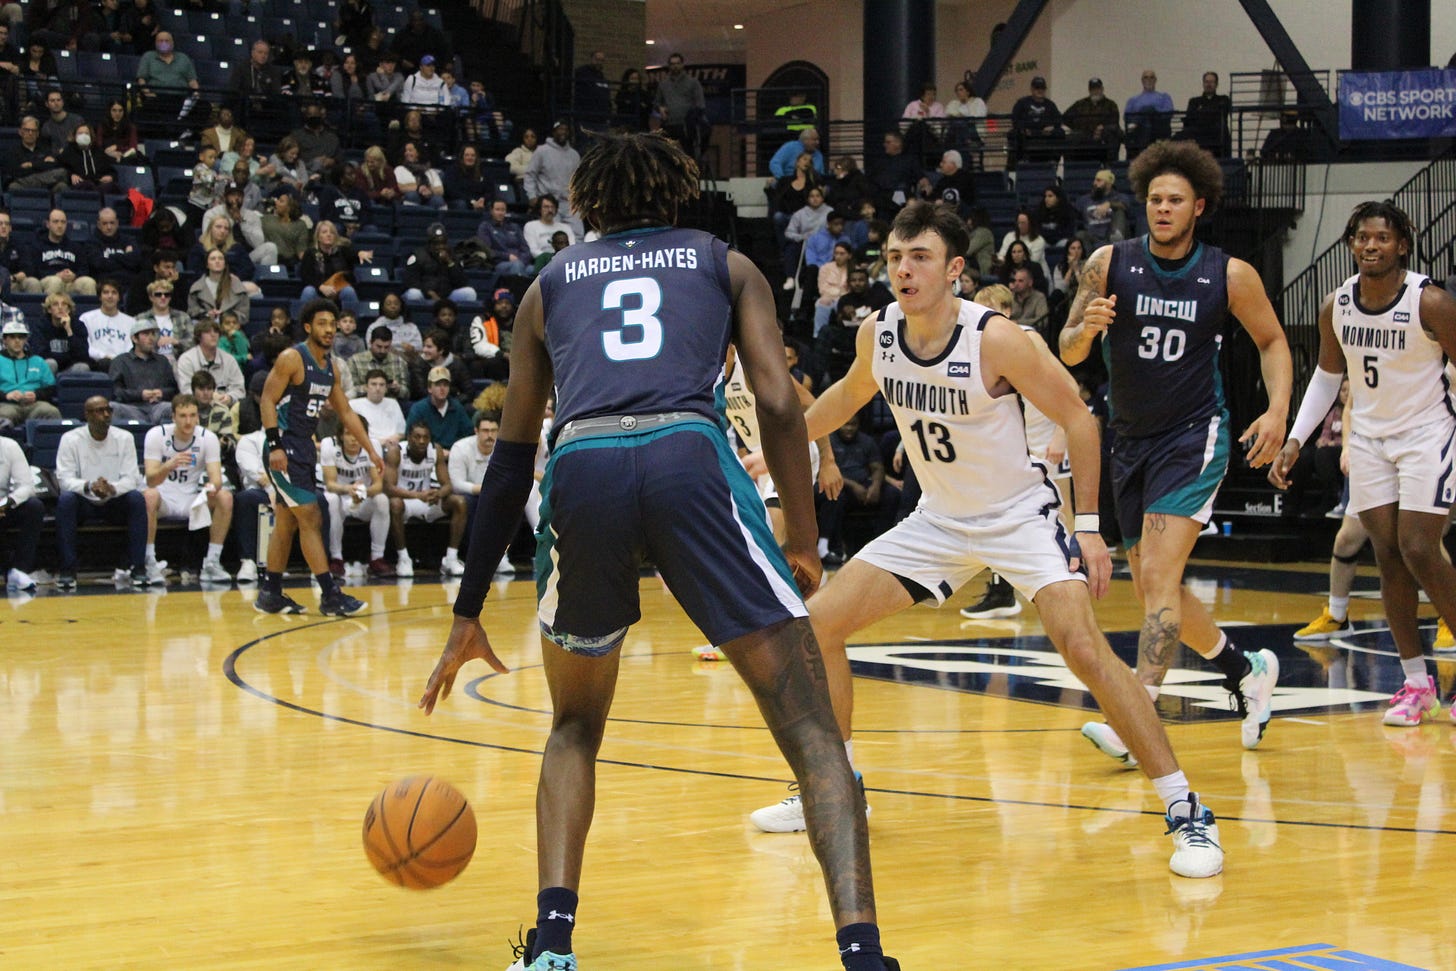 Monmouth’s Jack Collins (13) plays defense as Myles Foster (5) looks on during a game vs. UNC Wilmington on Dec. 28, 2022. (Photo by Adam Zielonka)